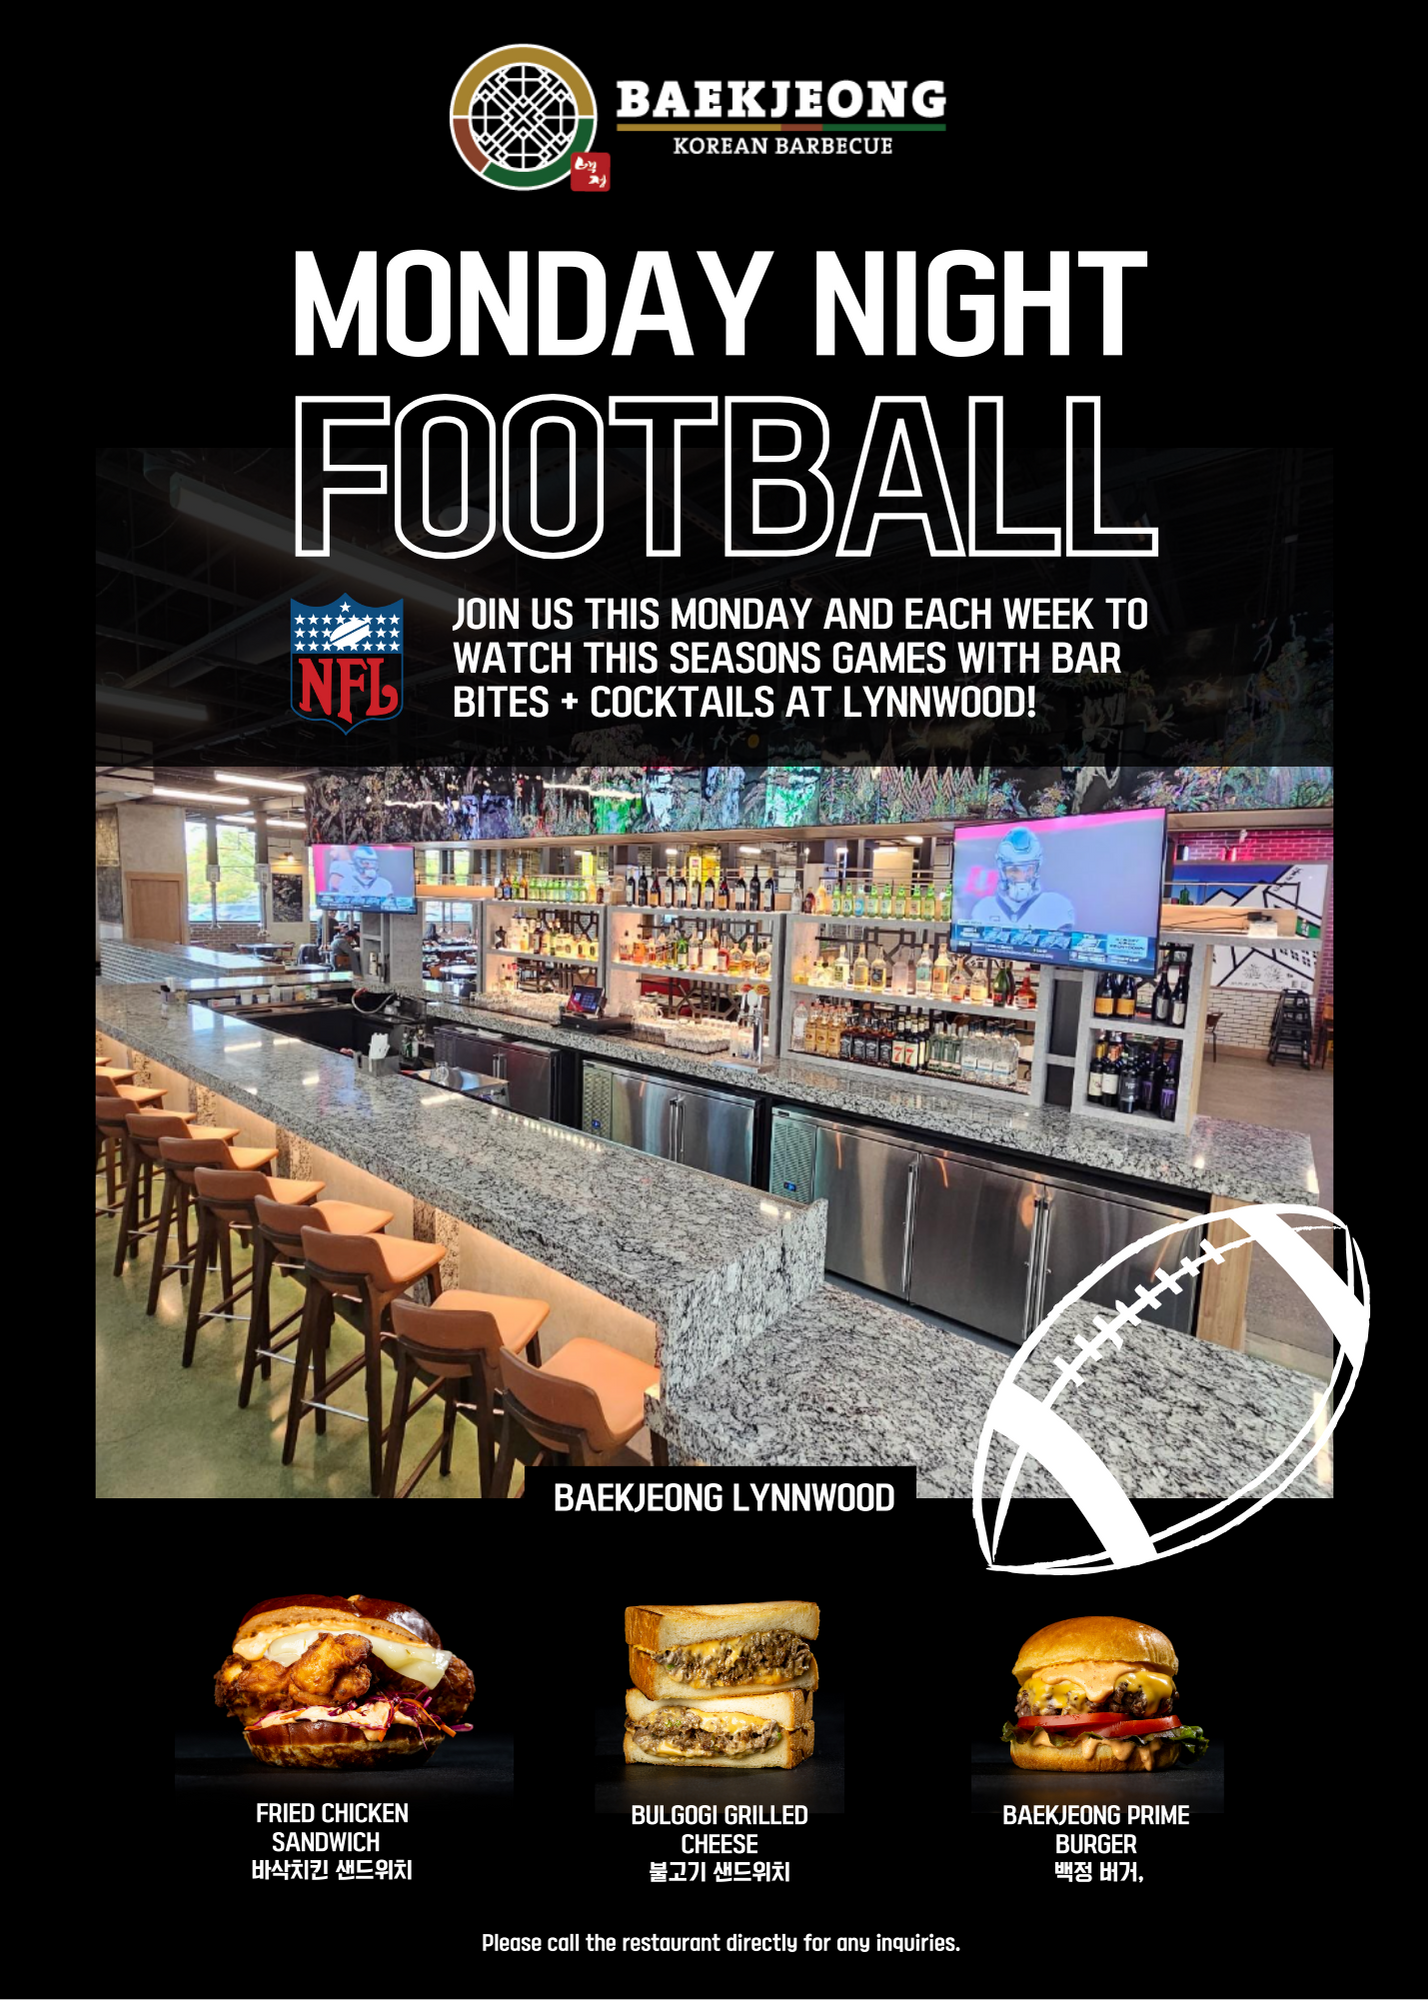 Monday Night Football; Join Us This Monday And Each Week To Watch This Seasons Games With Bar Bites + Cocktails At Lynwood!; Baekjeong Lynnwood; Fried Chicken Sandwich; Bulgogi Grilled Cheese; Baekjeong Prime Burger; Please cal the restaurant directly for any inquiries.